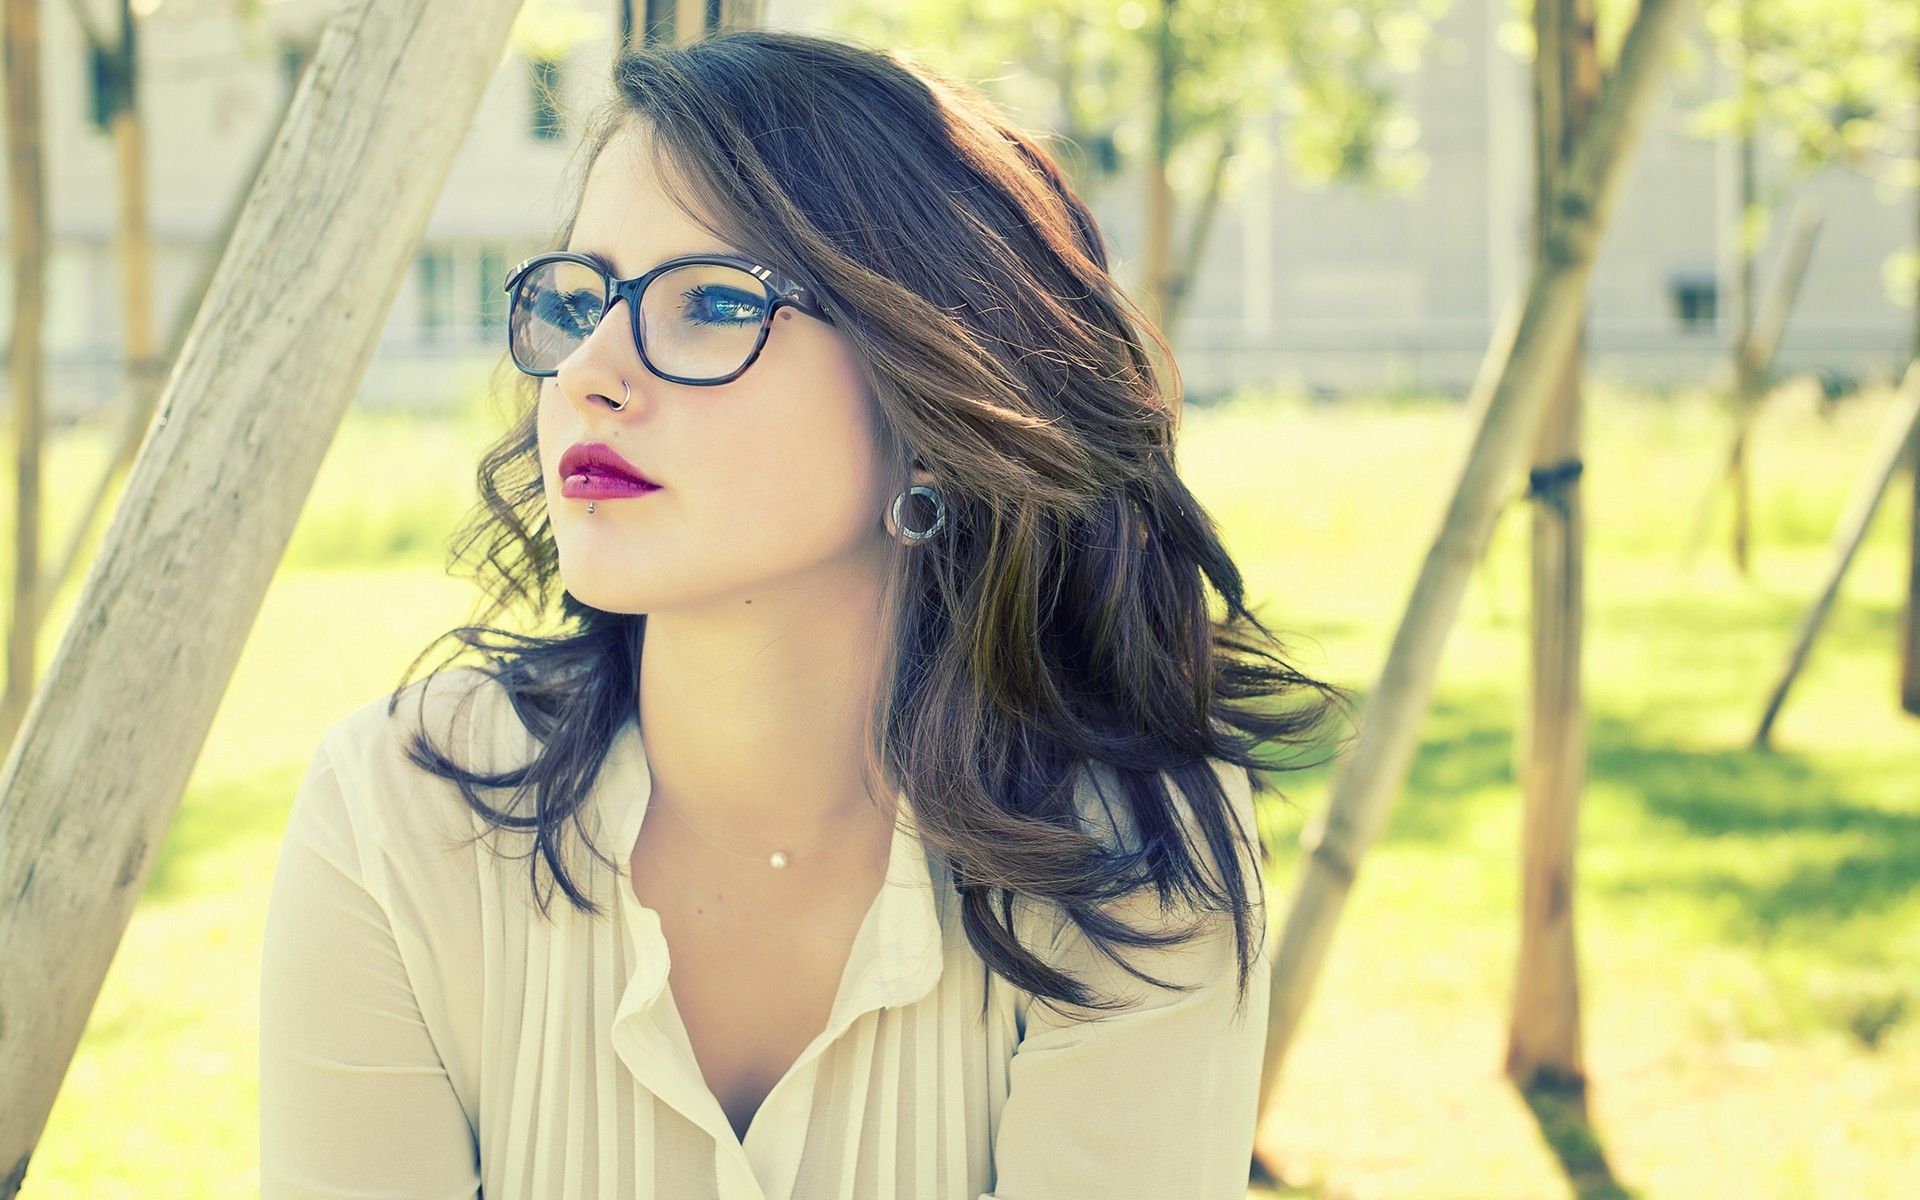 Girls With Glasses Wallpaper 33596 1920x1200px